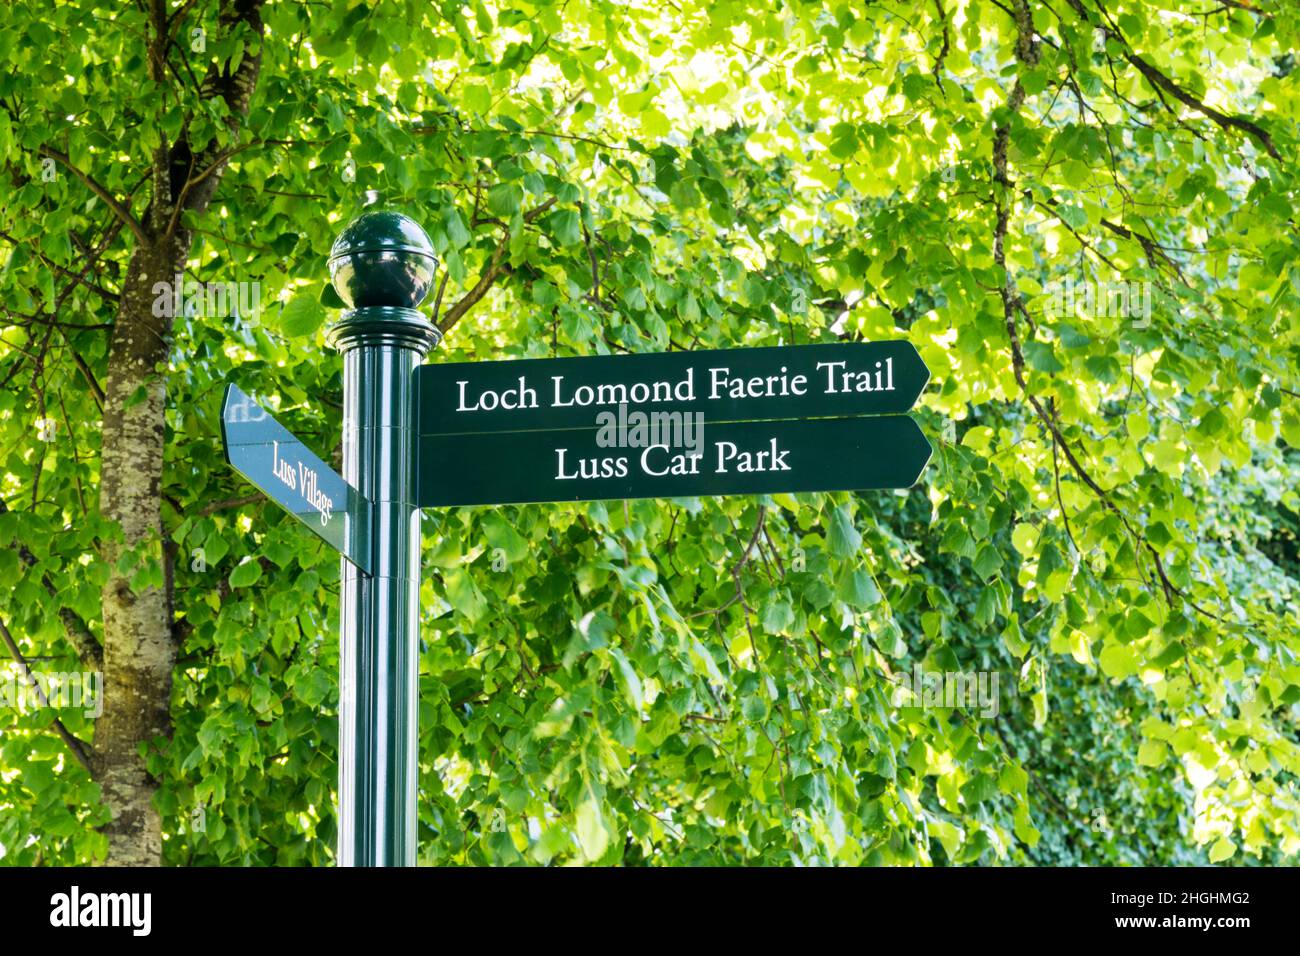 A sign for the Loch Lomond Faerie Trail in Luss, Scotland. Stock Photo